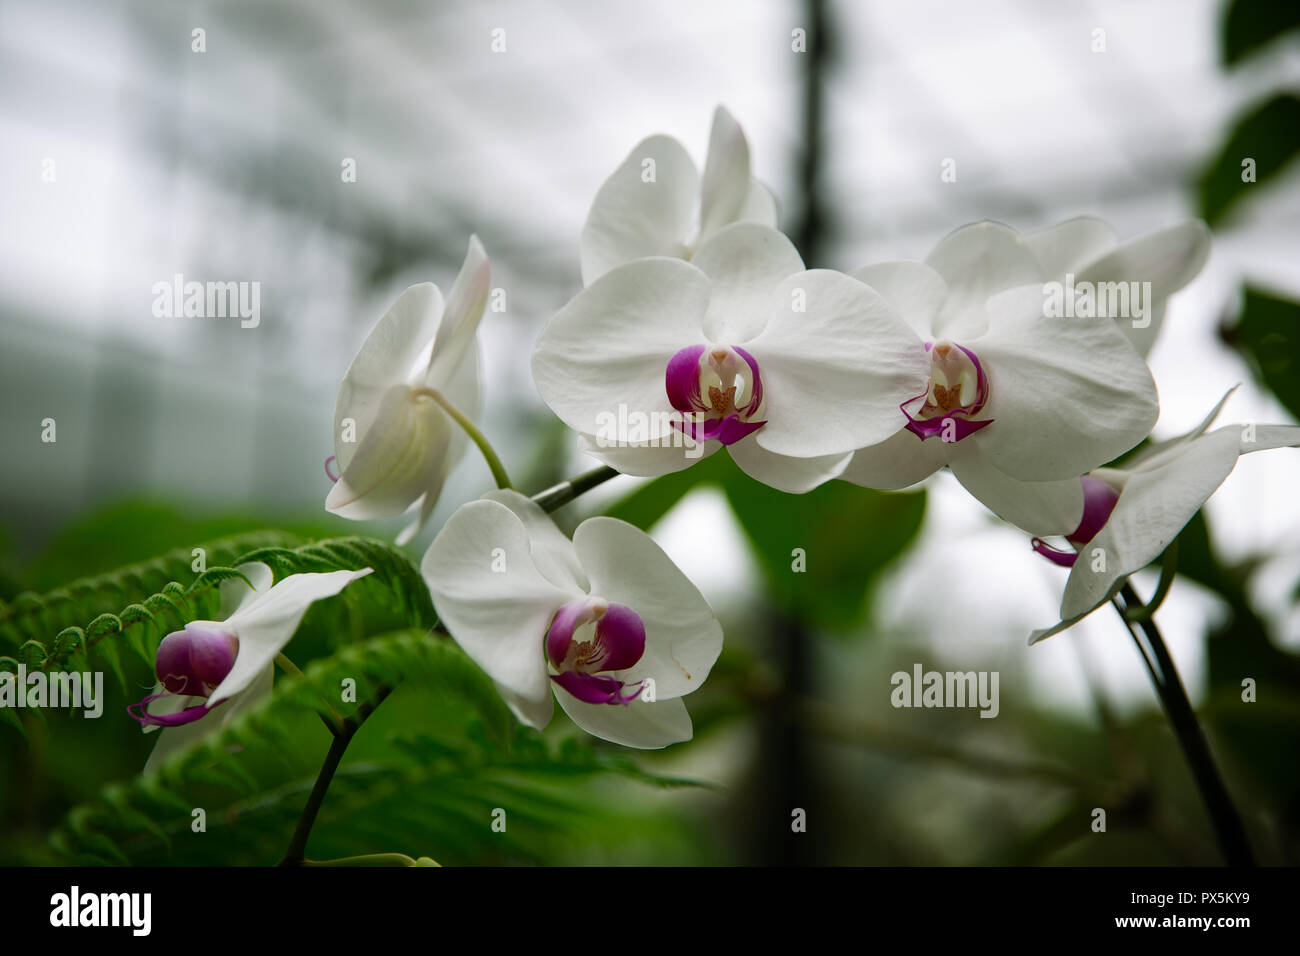 Le orchidee bianche con centro viola in Lembang, Indonesia Foto Stock